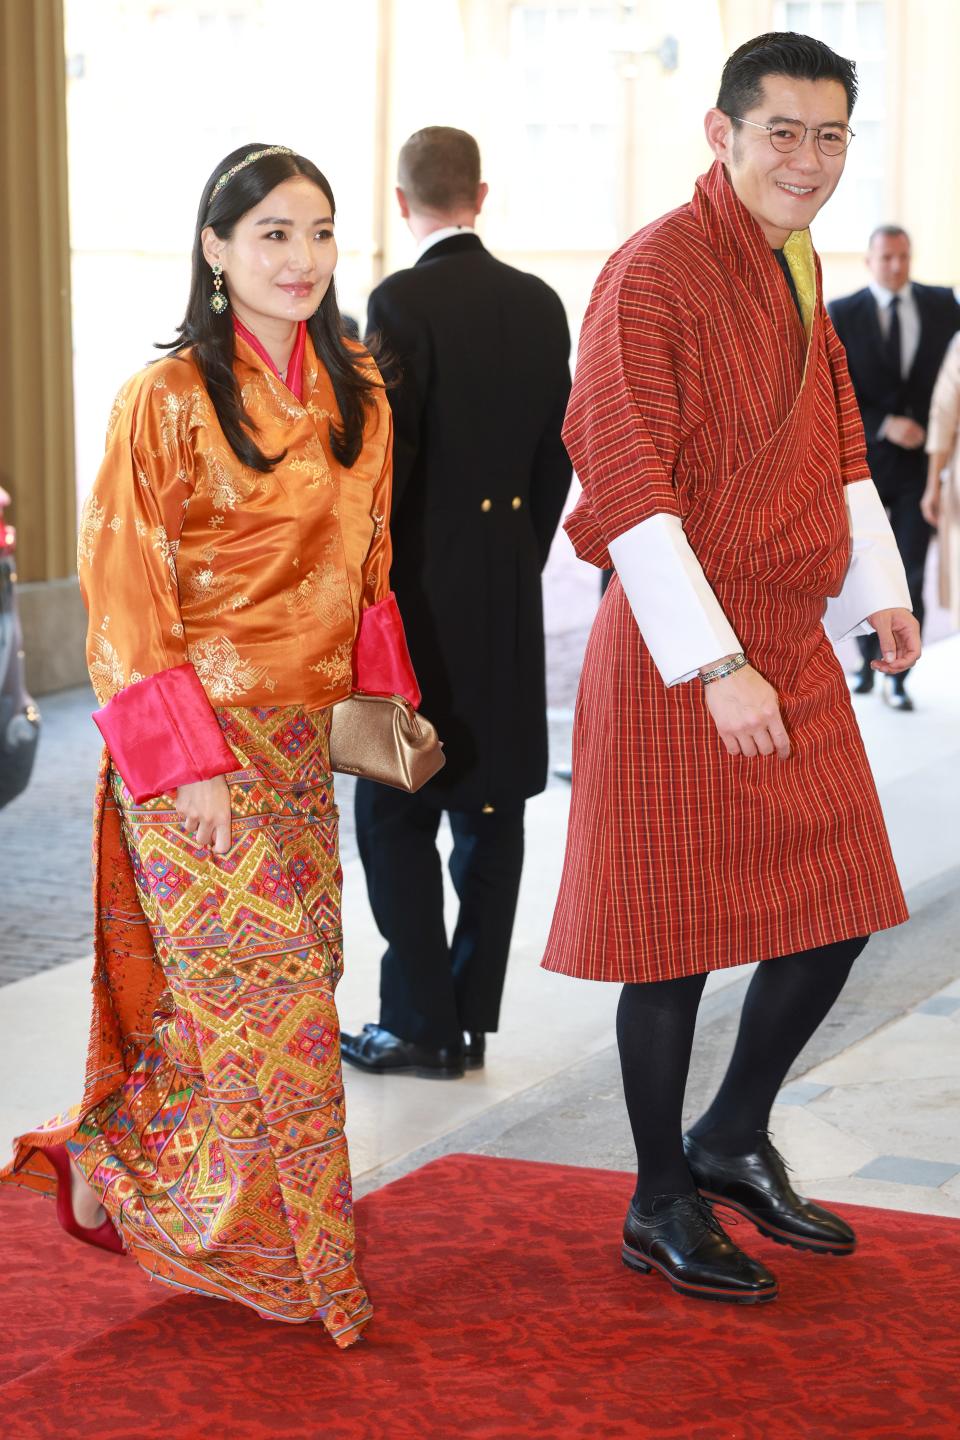 The king and queen of Bhutan attend a coronation reception at Buckingham Palace